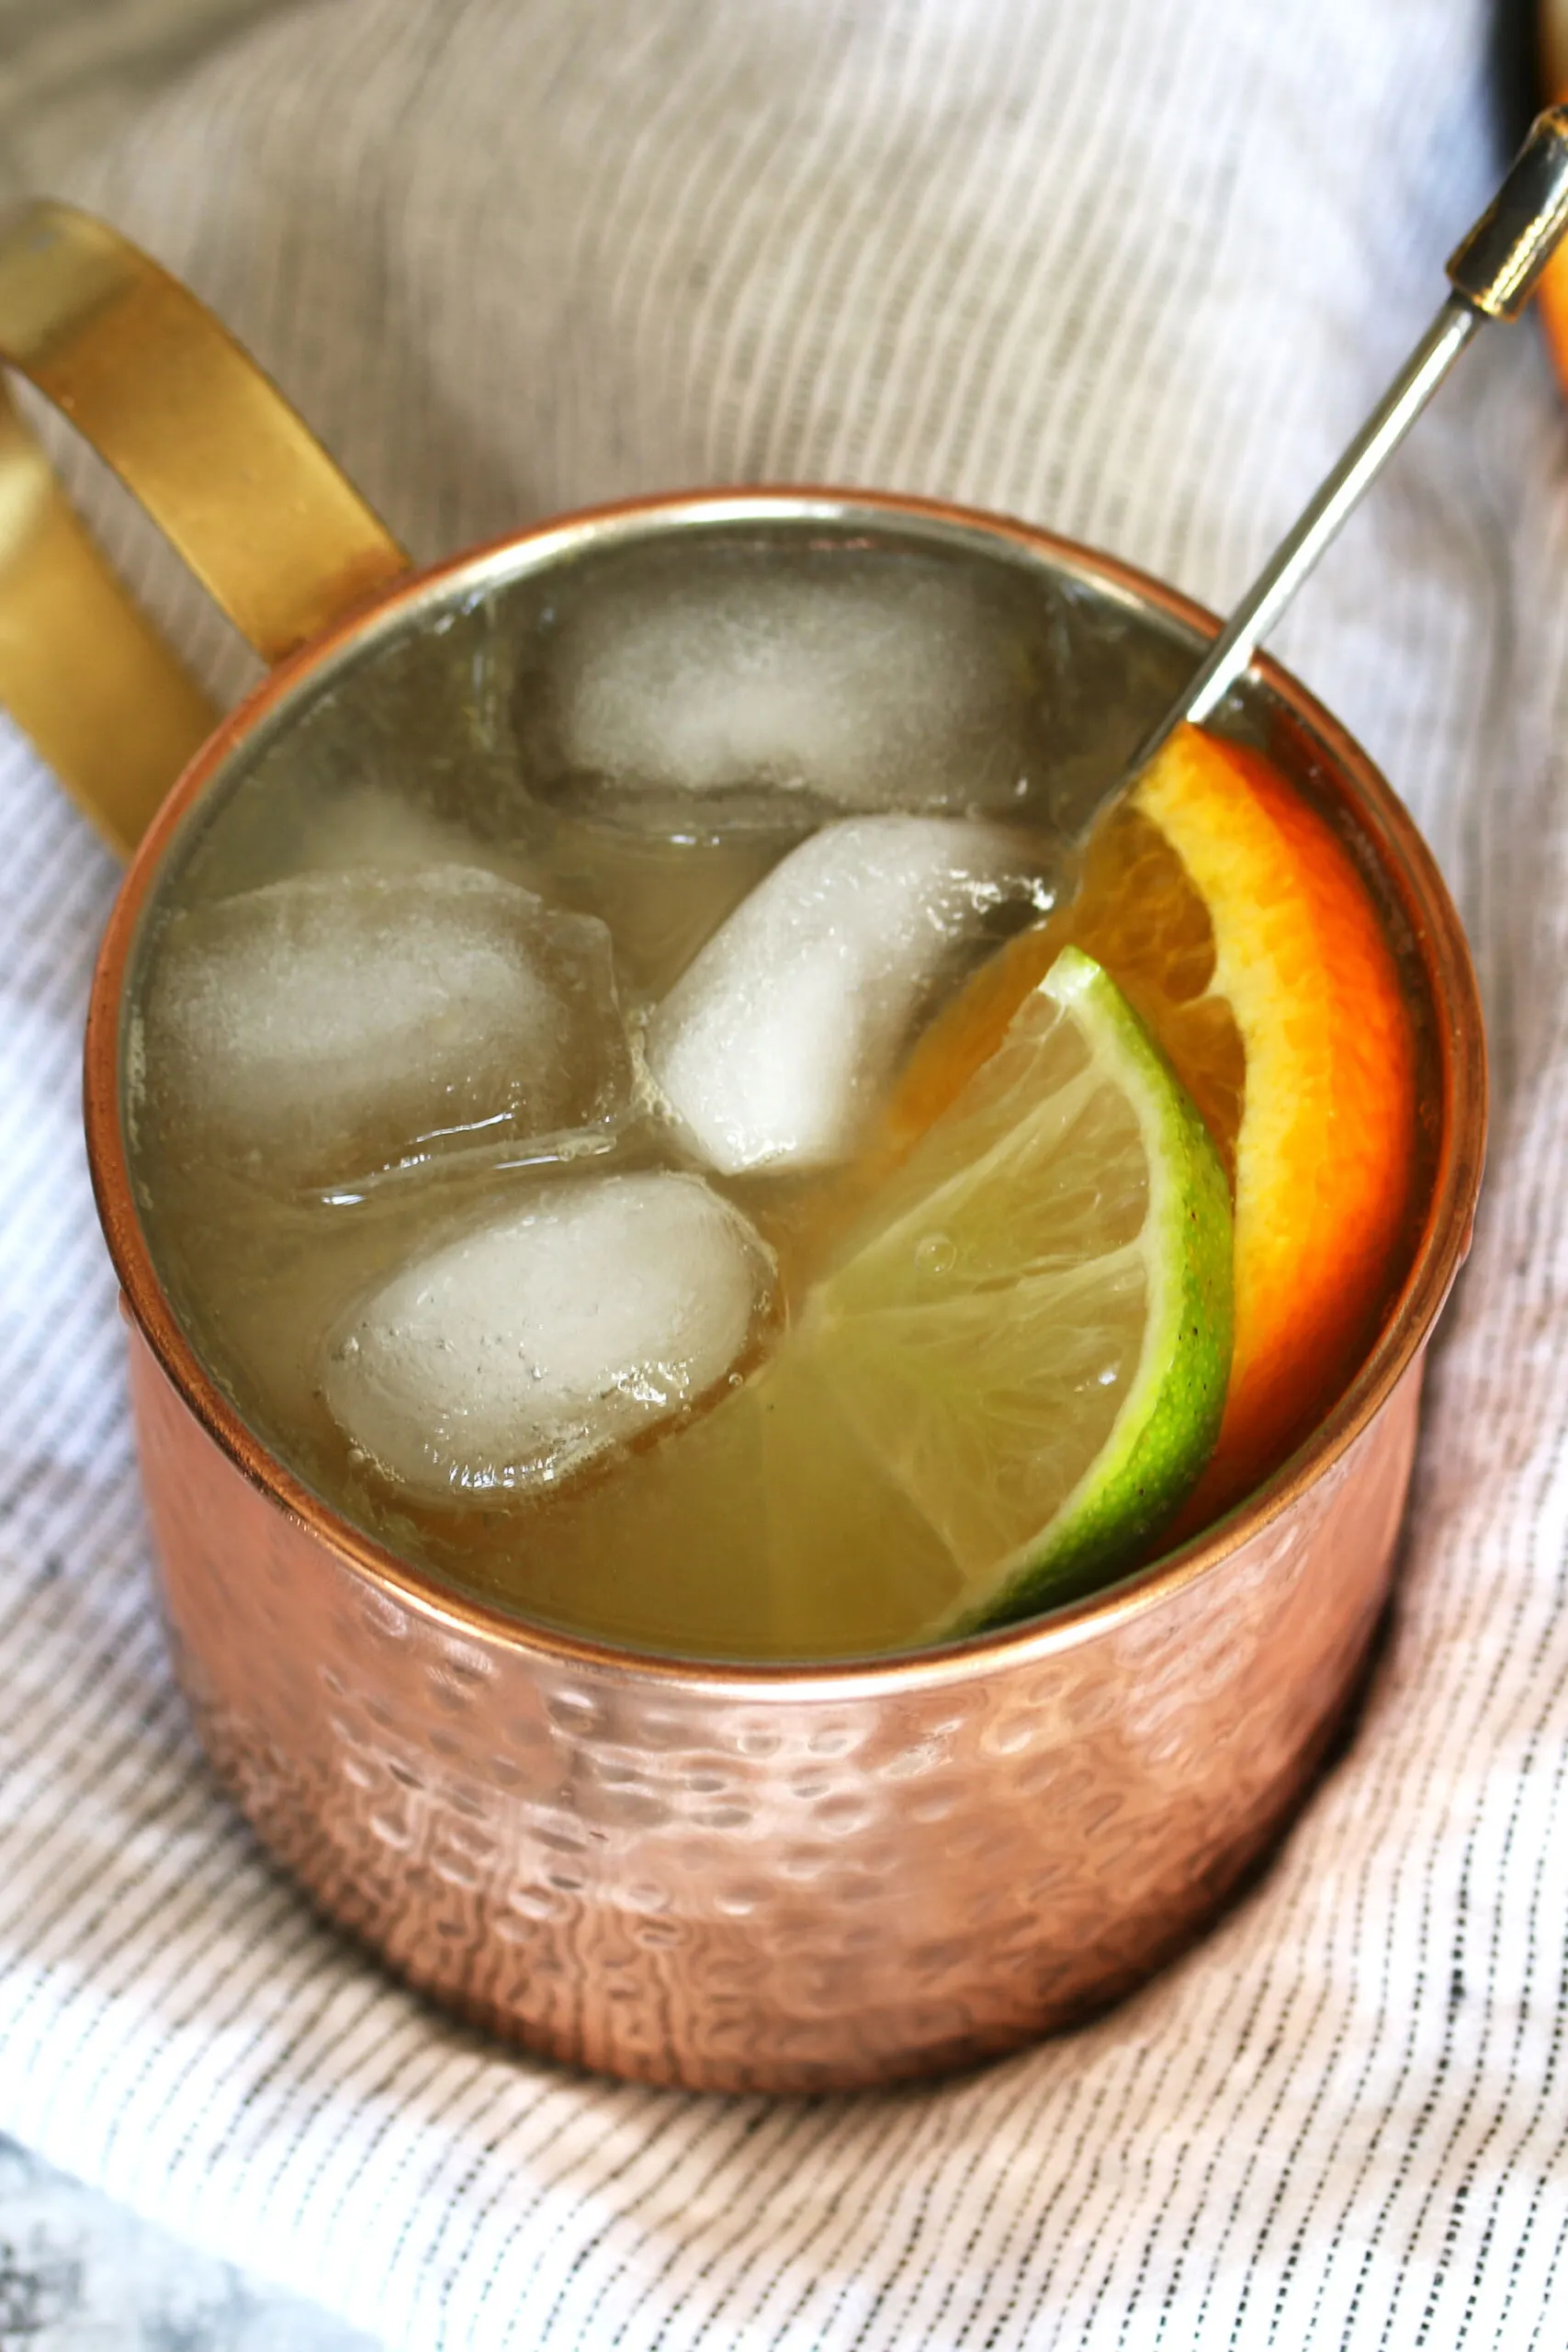 orange mule cocktail with ice, lime and orange garnishes